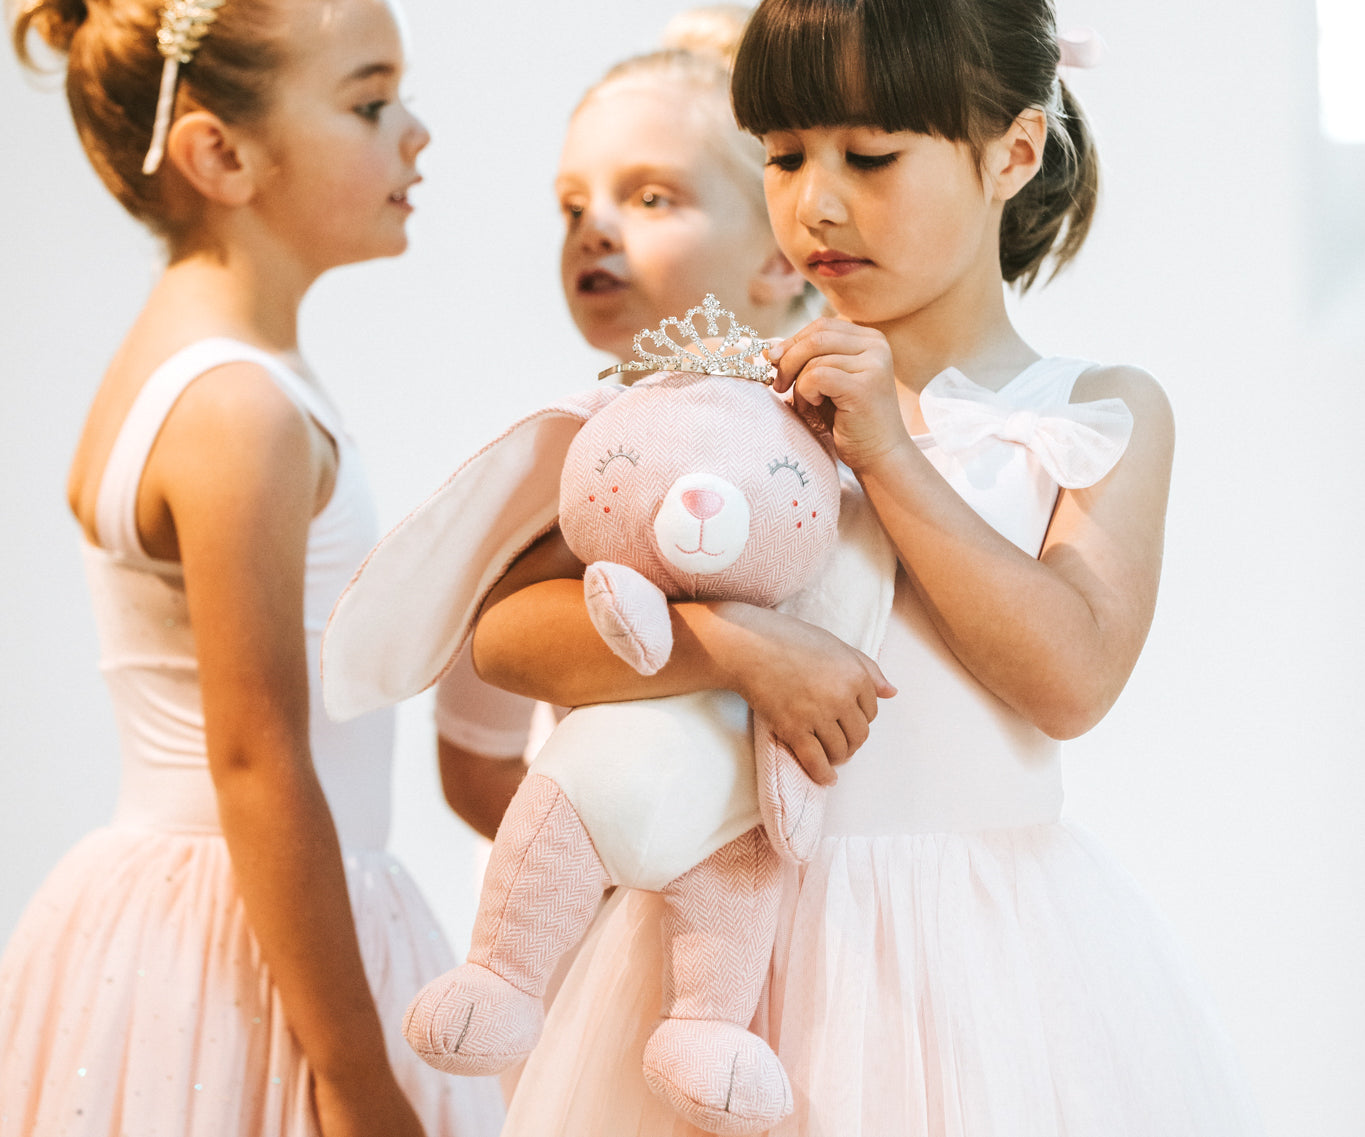 Entertain your little dancers with these fun Ballet activities